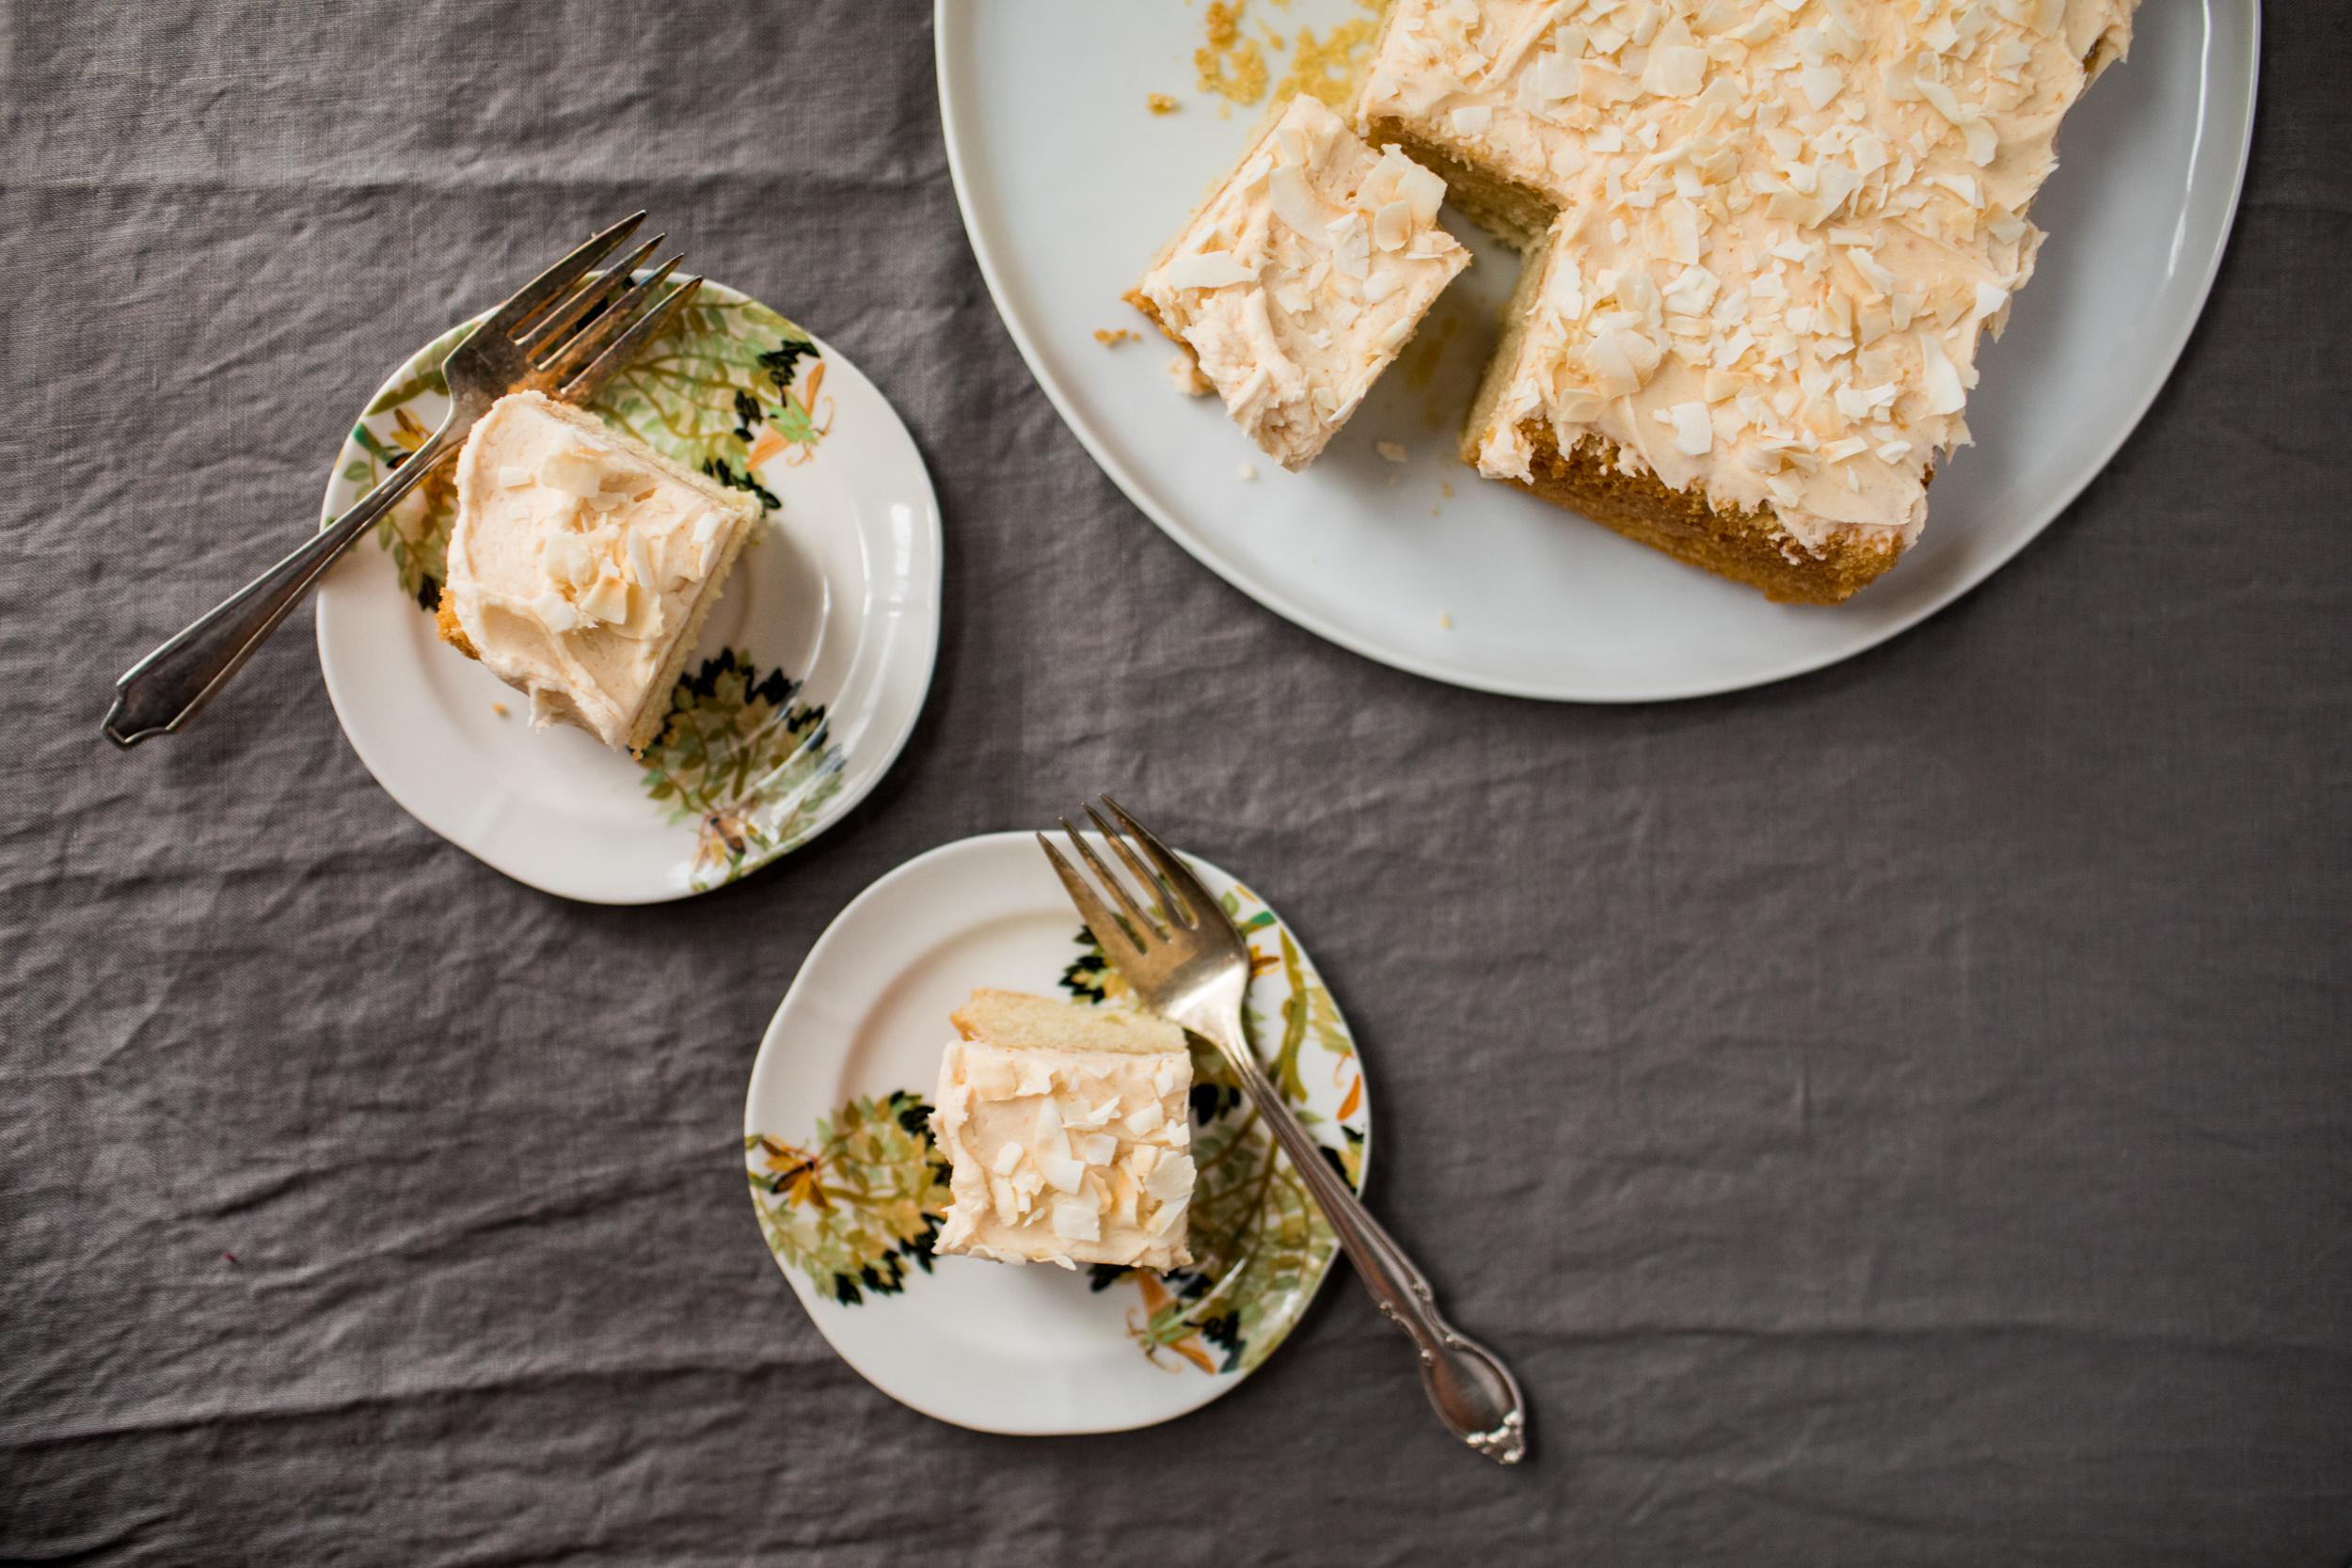 Two squares of key lime cakes are served on small plates. The rest of the cake sits next to them on a large platter.